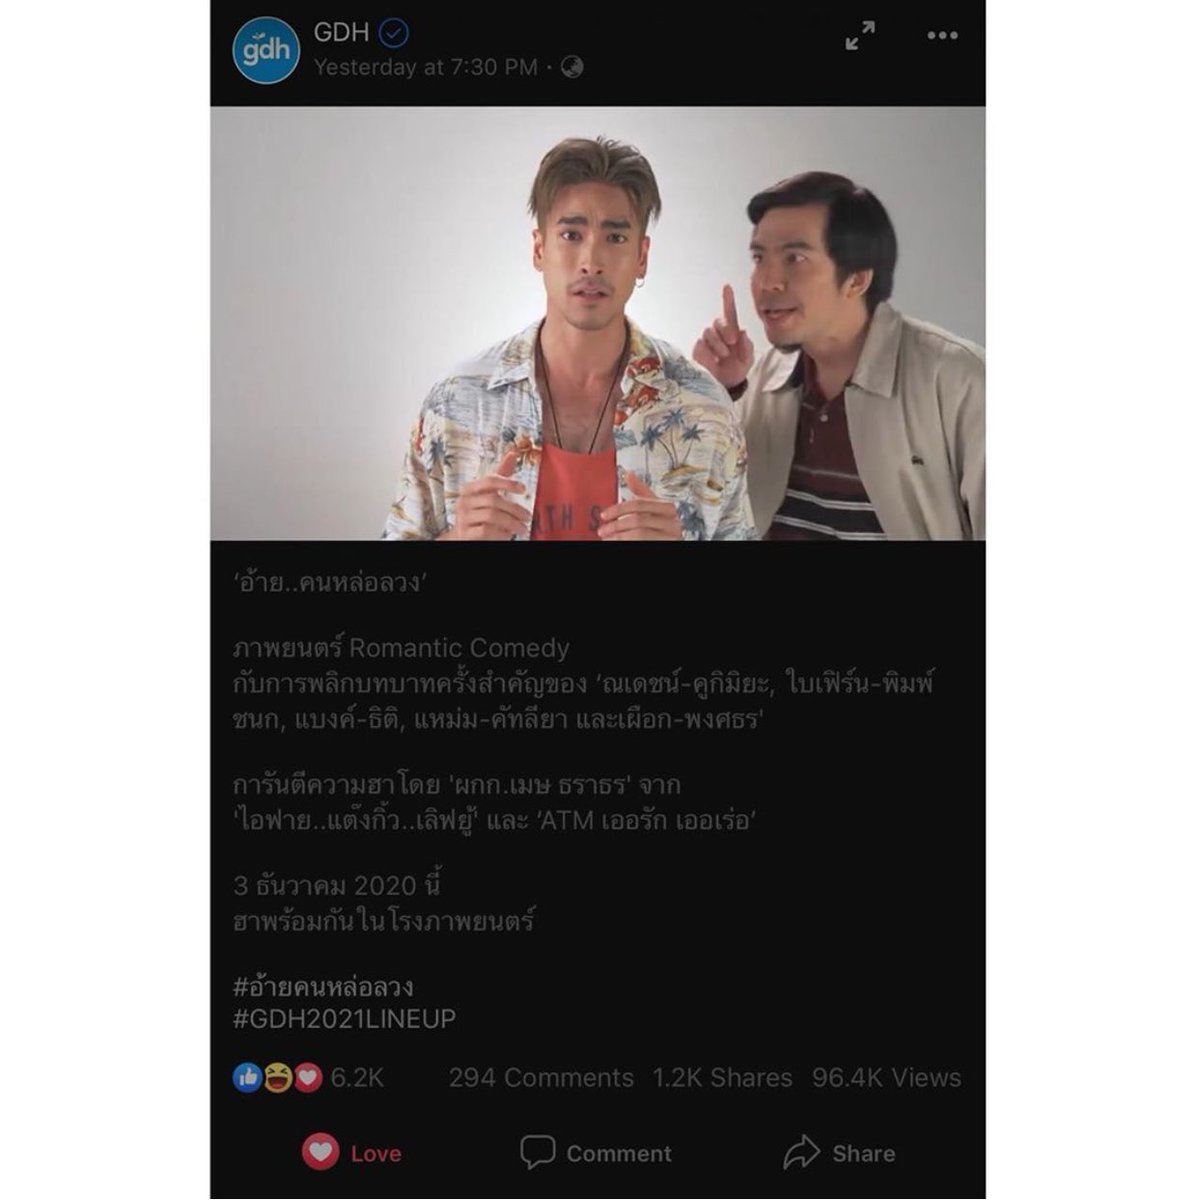 Hi guys! Please watch the movie teaser of Nadech Kugimiya at Official Facebook Page of GDH.LINK IS HERE:  https://www.facebook.com/gdh559/videos/687937185147136/?vh=e&extid=6LiQyrkDoqh1SI1Y&d=nLet’s gain more views for this. Thank you so much!  #GDHmovie  #nadech  #kugimiyas  #ณเดชน์  #อ้ายคนหล่อลวง